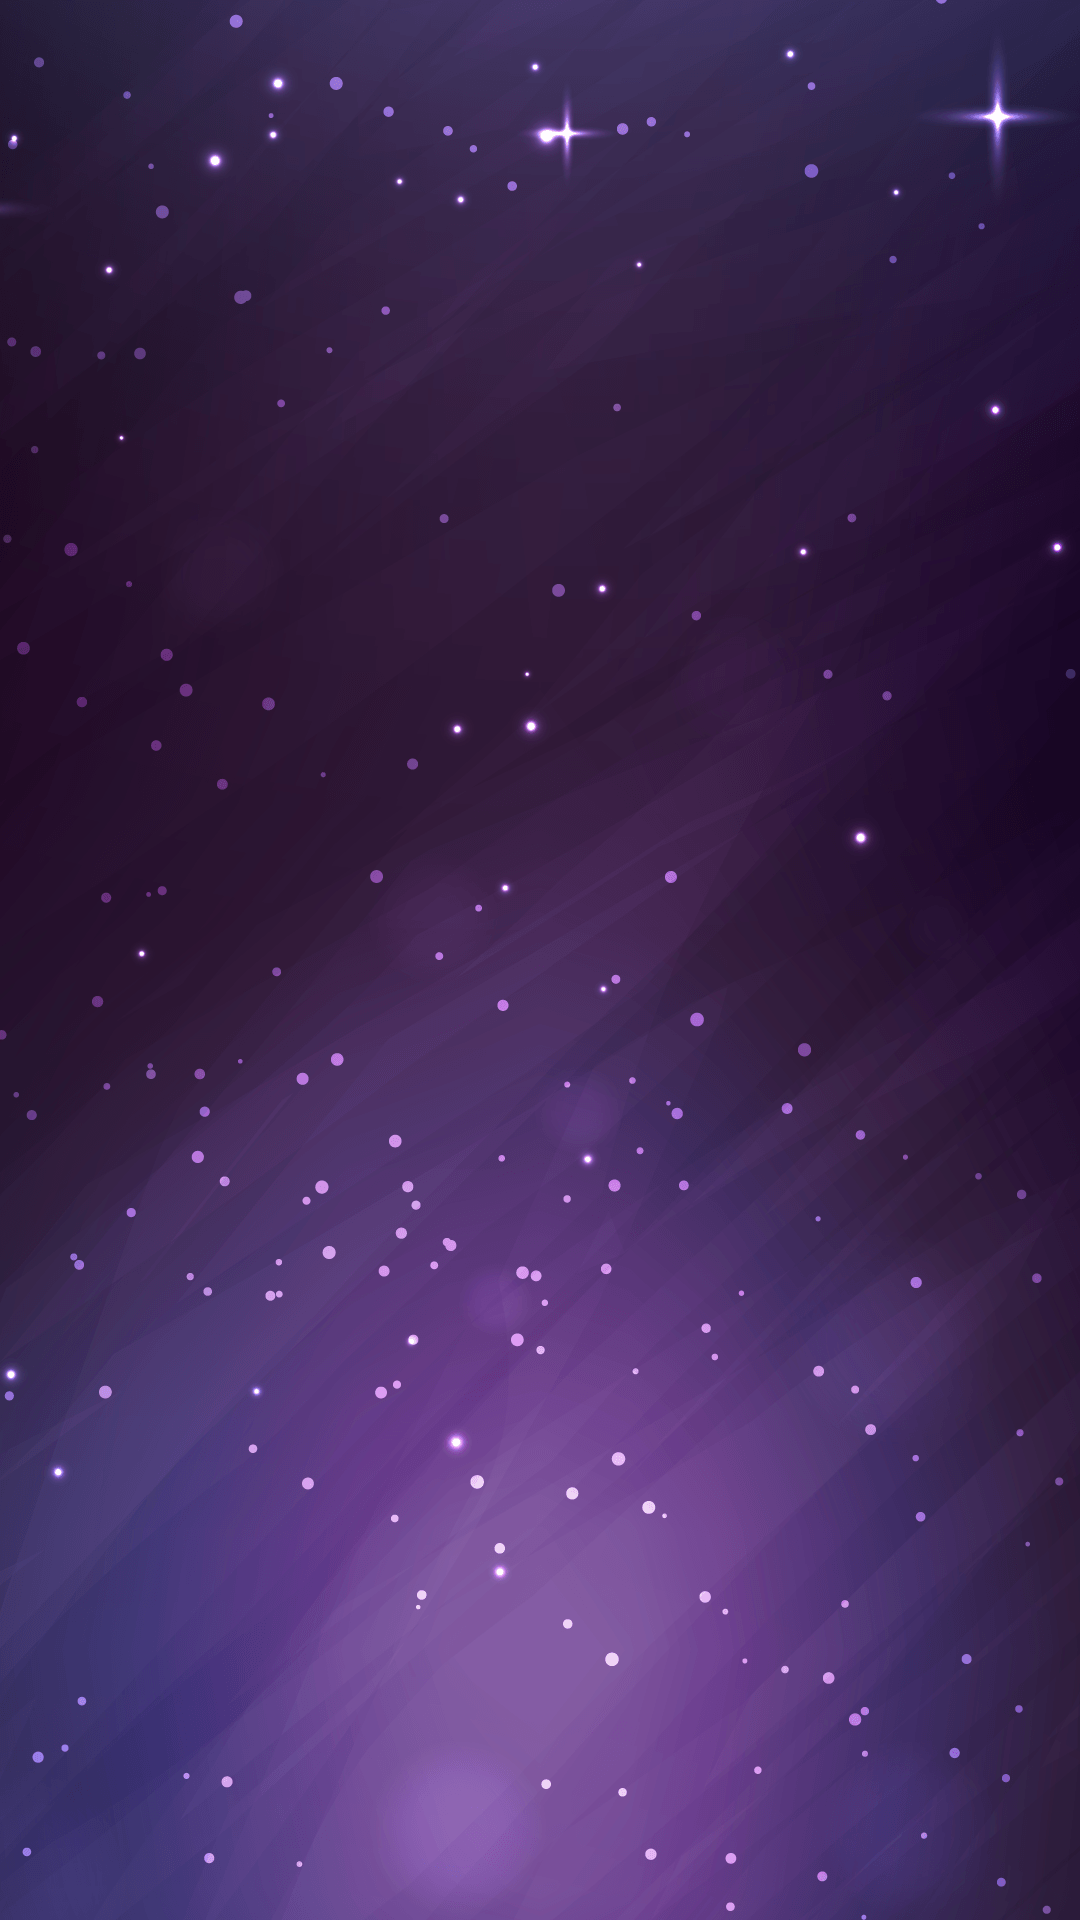 Ultra HD Purple Space Wallpaper For Your Mobile Phone .0227